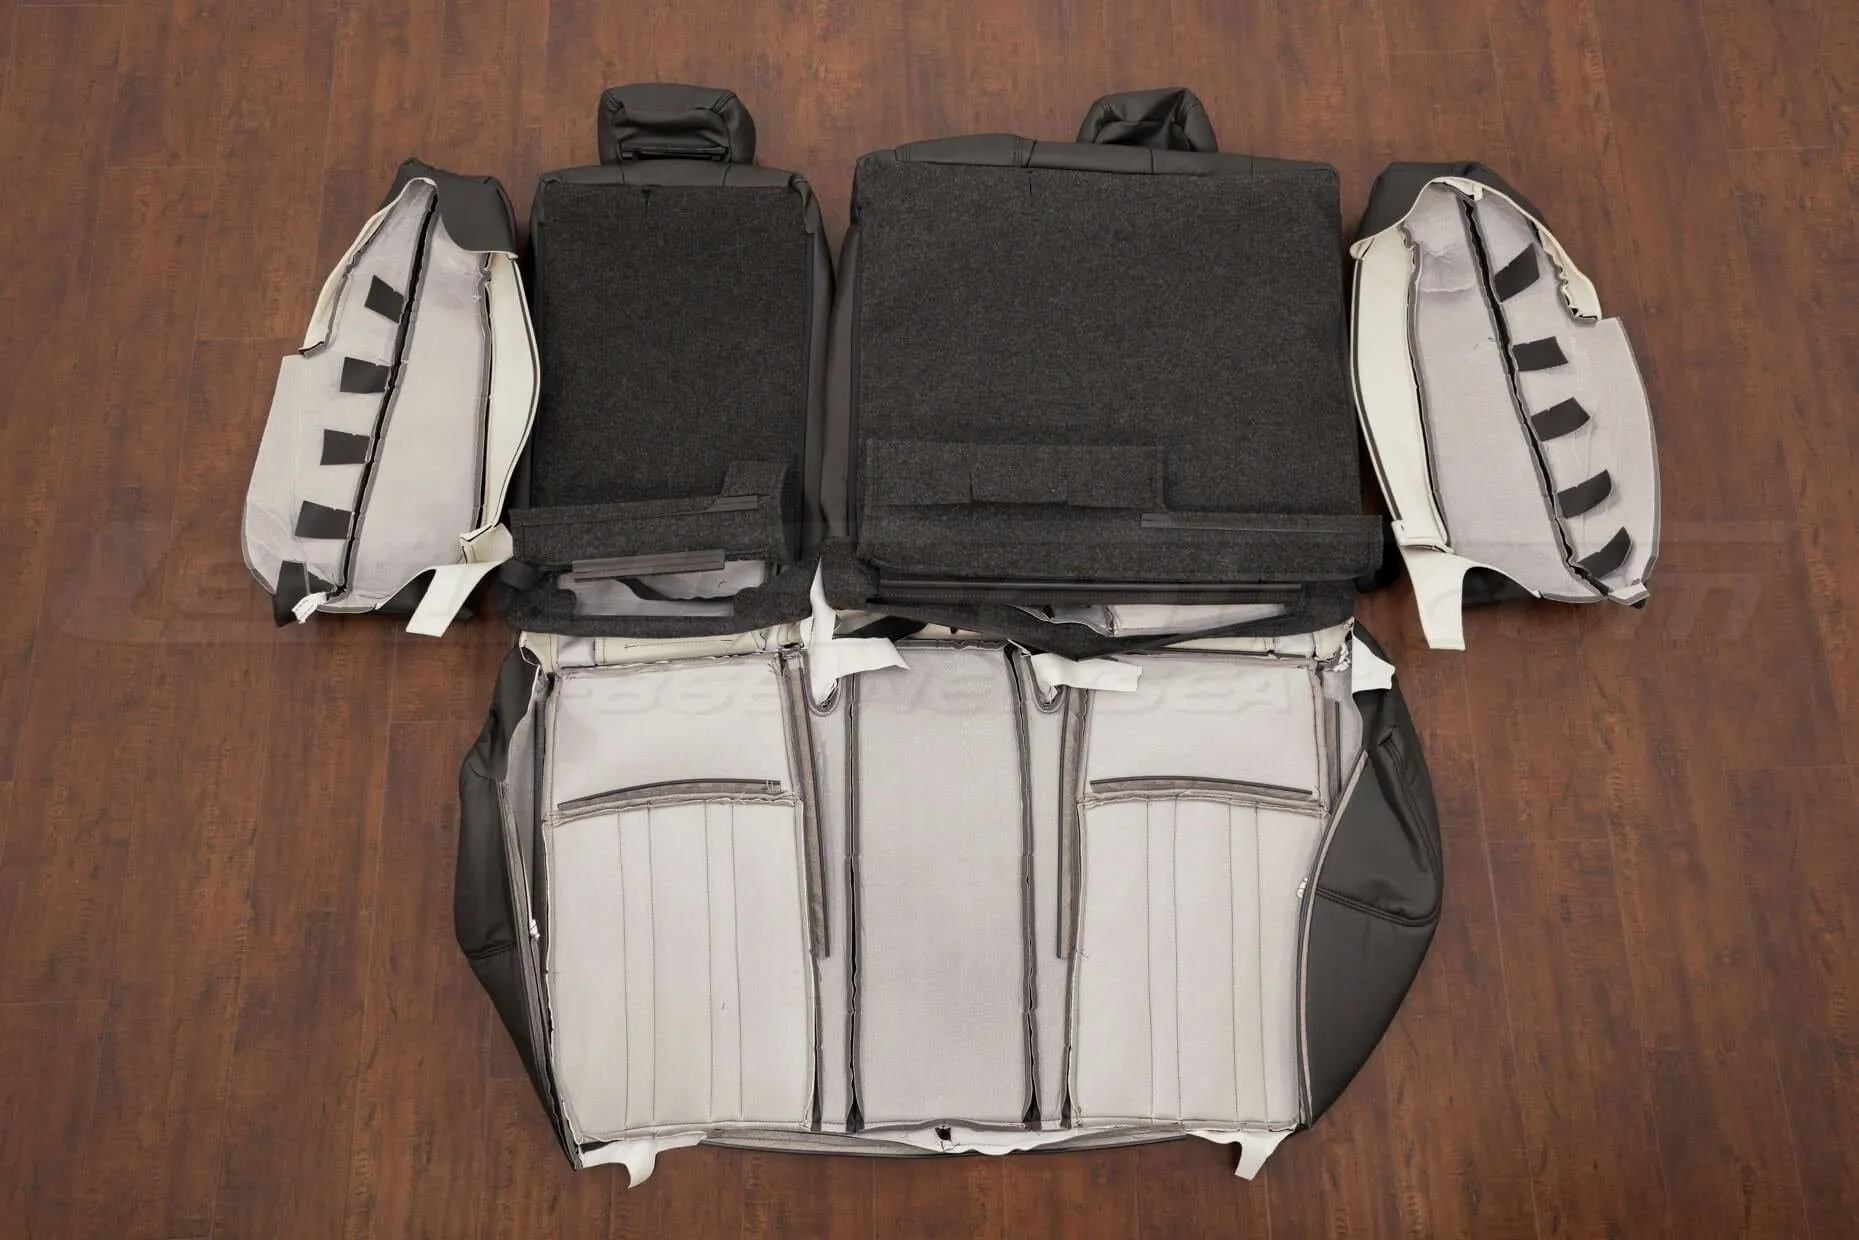 18-21 Honda Accord Leather Kit - Black & Dove Grey - Back view of rear seats and bolsters